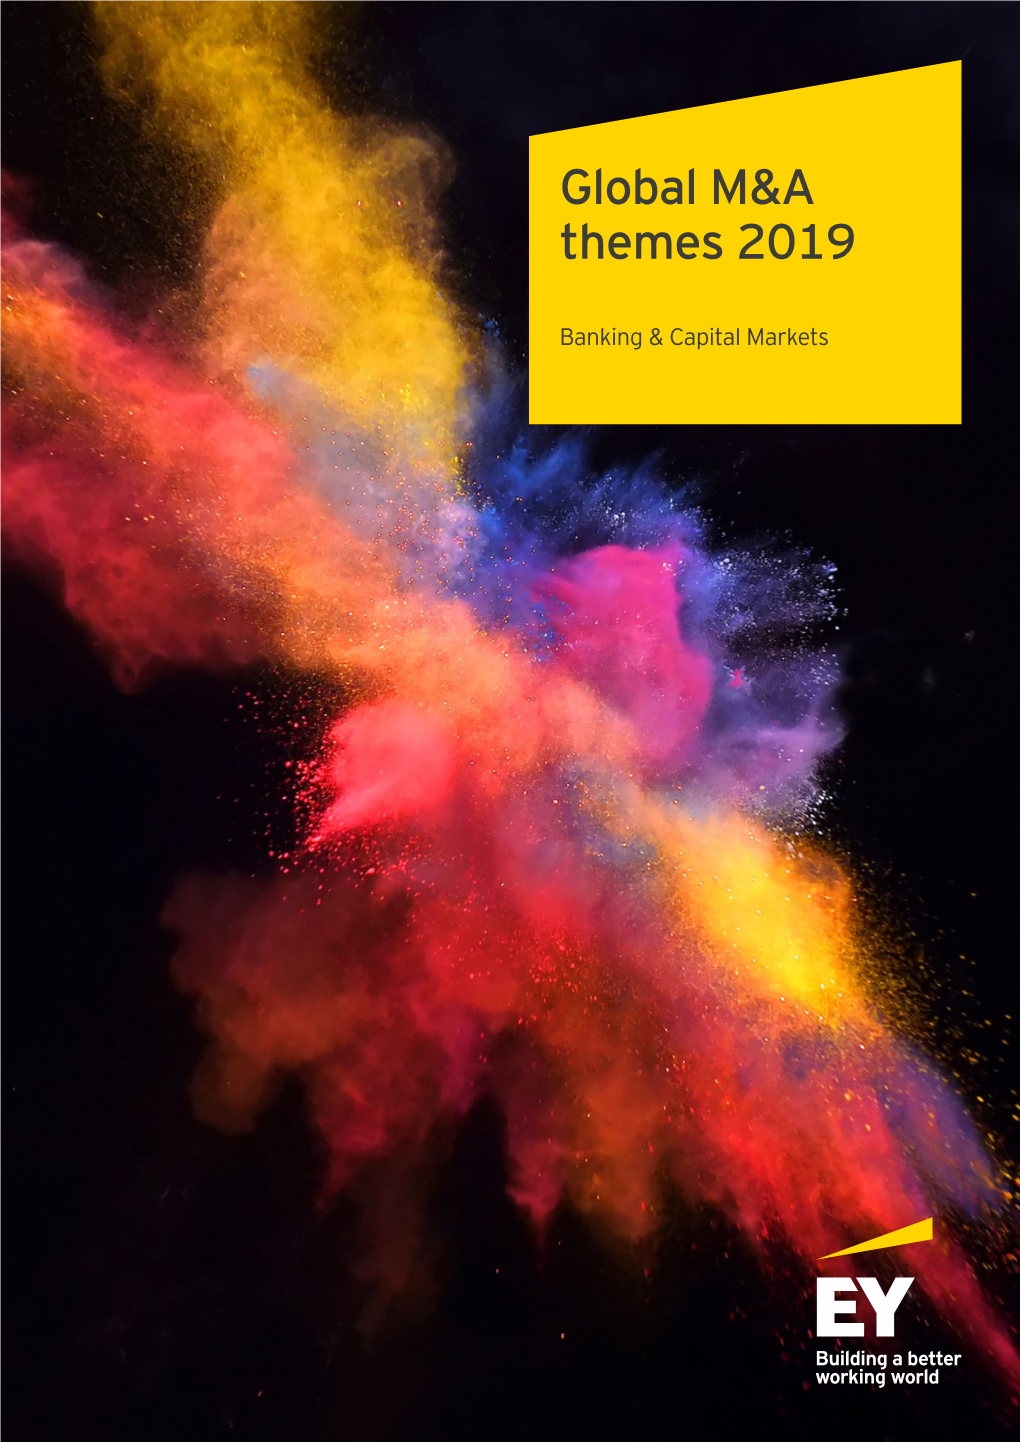 Global M&A Themes 2019